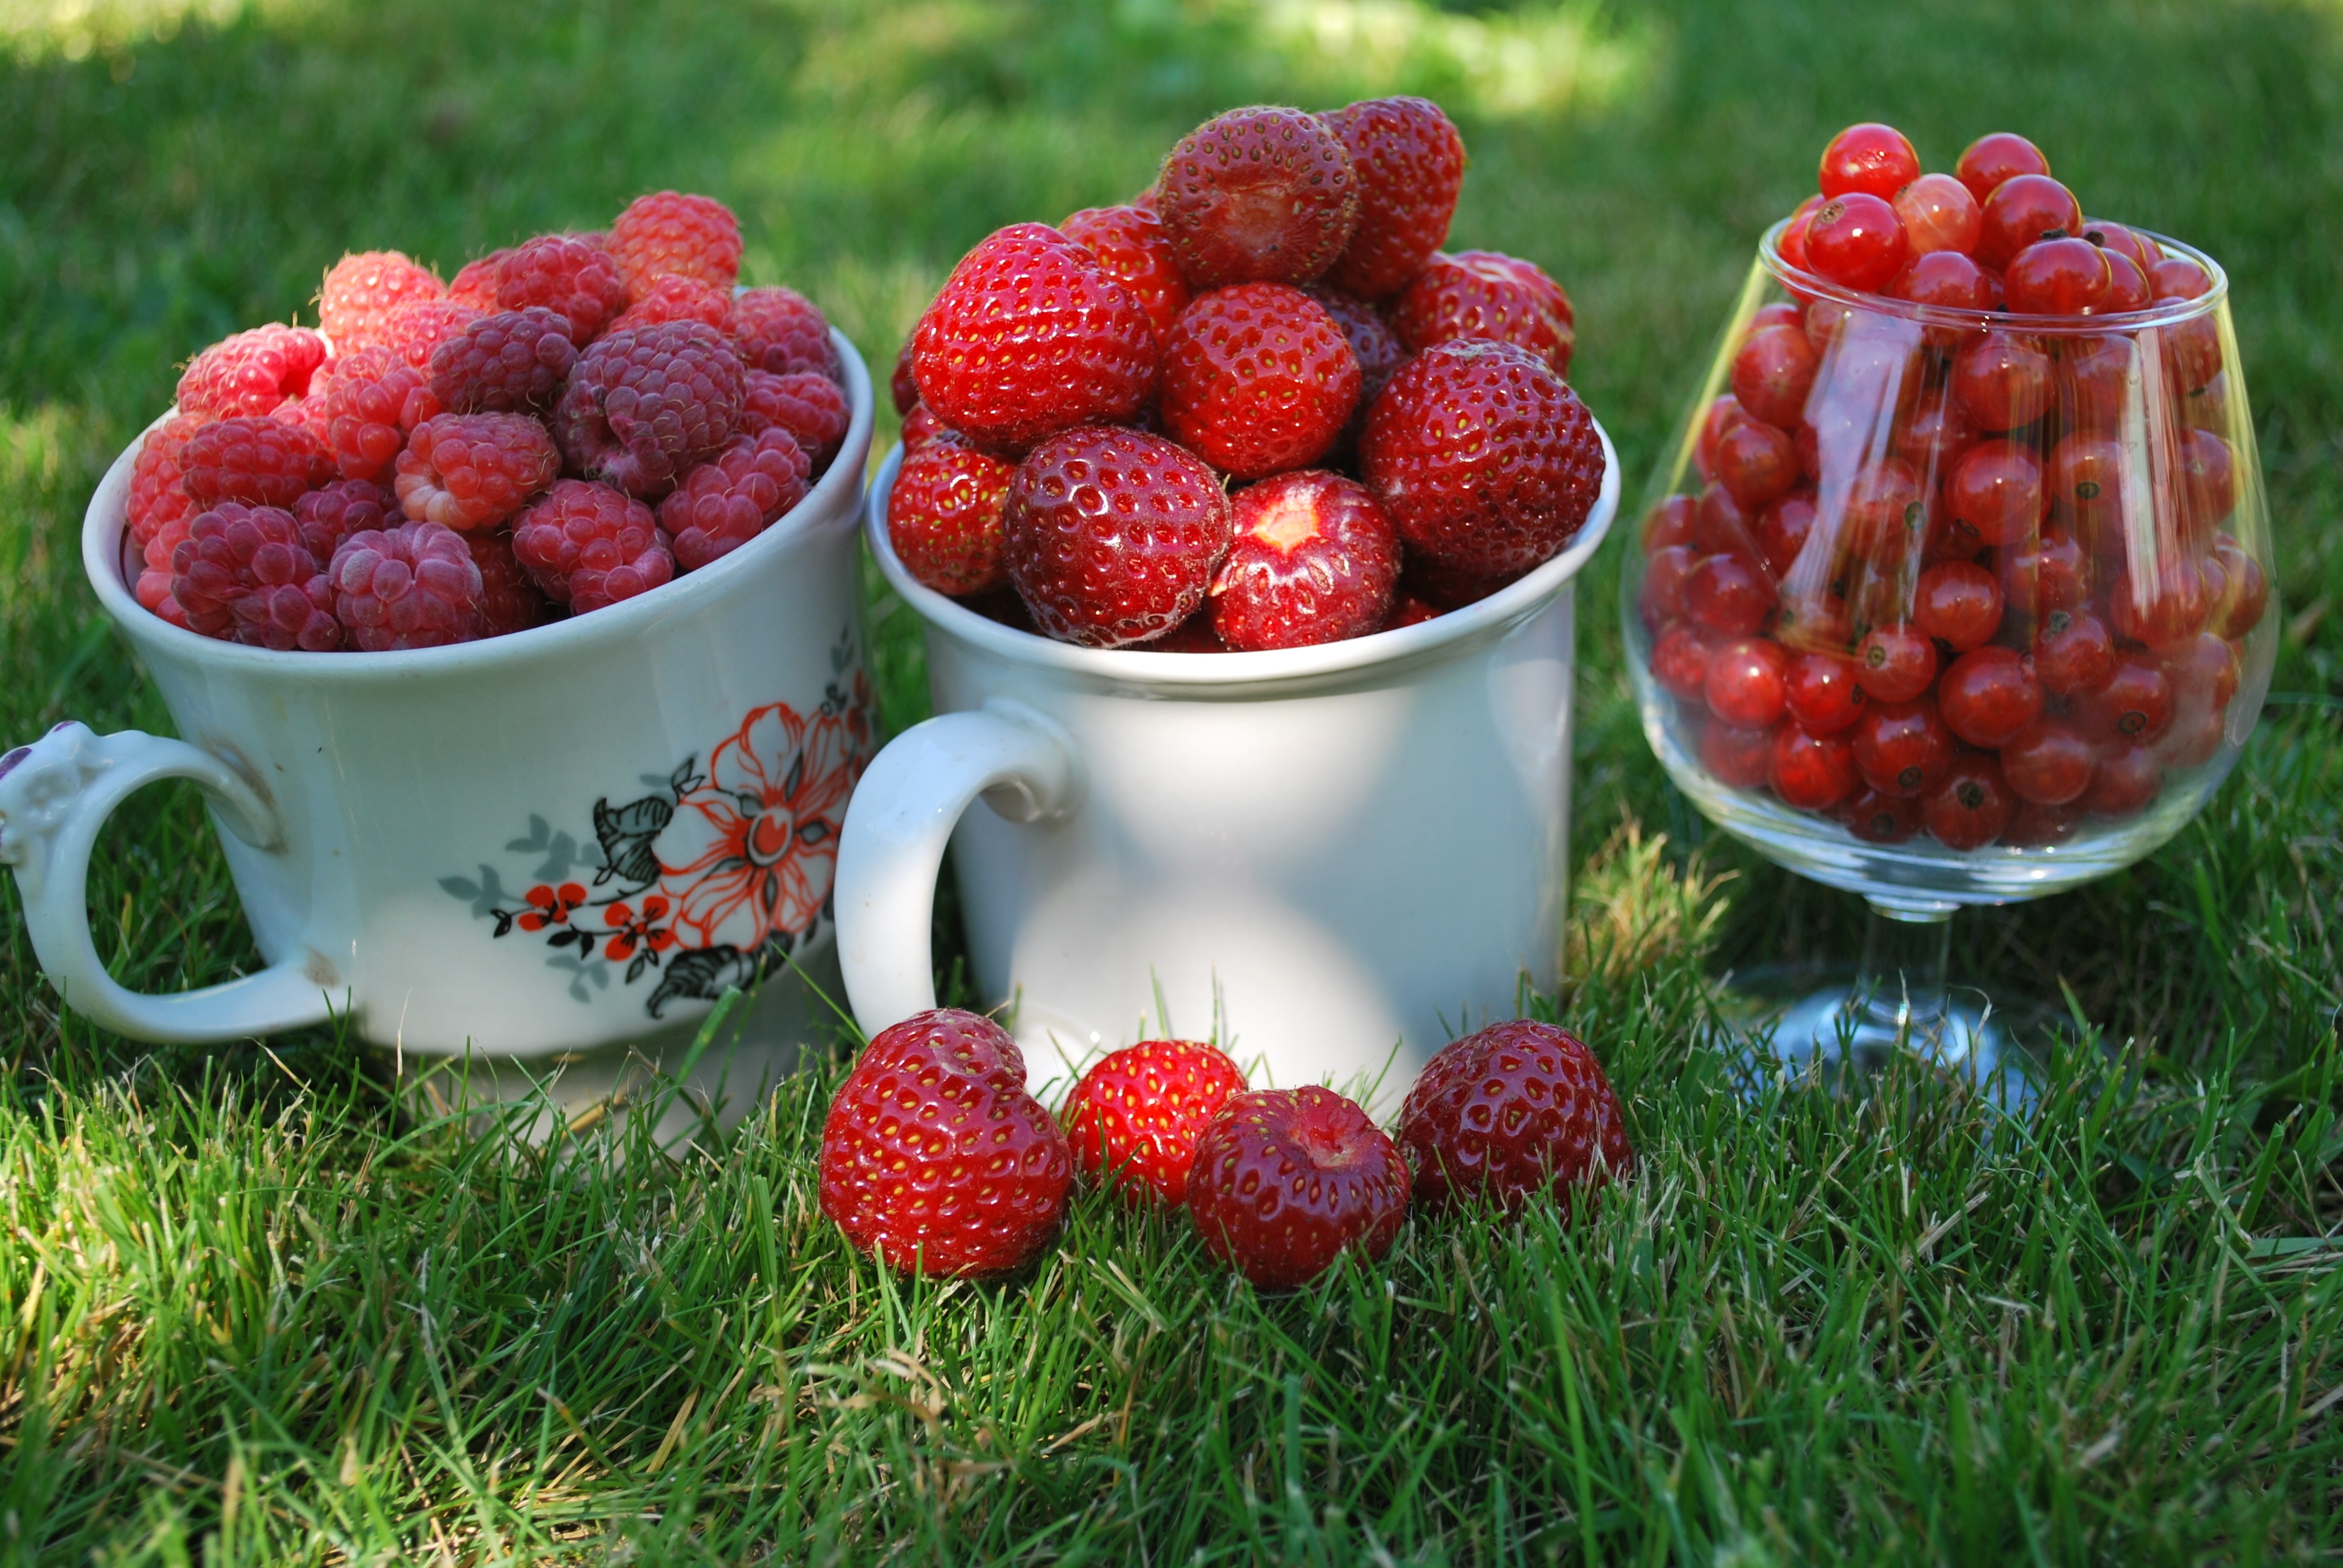 57749 Screensavers and Wallpapers Cups for phone. Download food, strawberry, grass, cups, raspberry, berries, currant, red, macro, mugs, country house, dacha, wineglass, goblet pictures for free